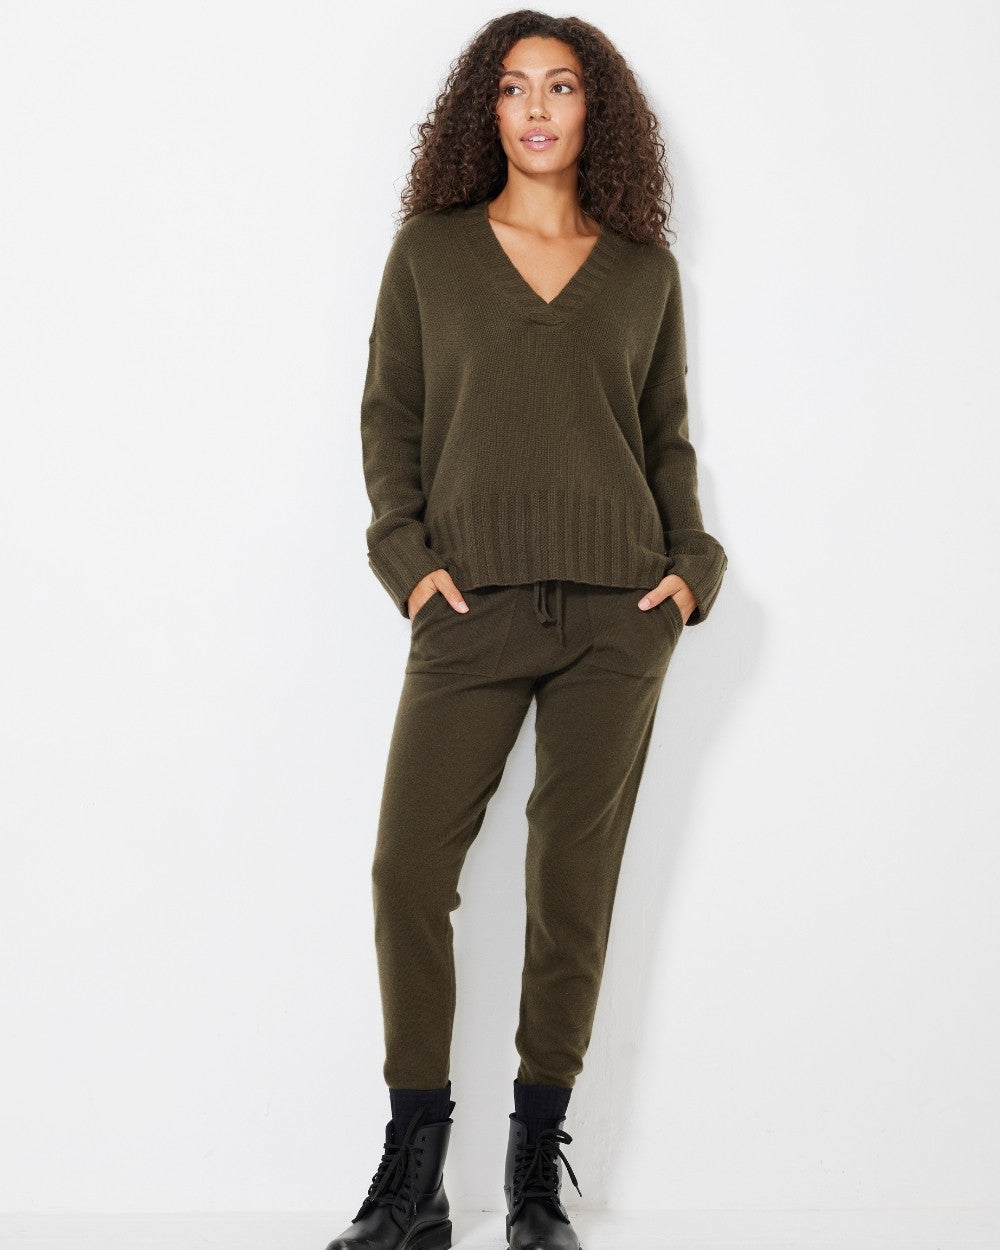 Charlotte Oversized Pure Cashmere V-neck with Brooklyn Joggers.  Both in Army.  Not Monday.